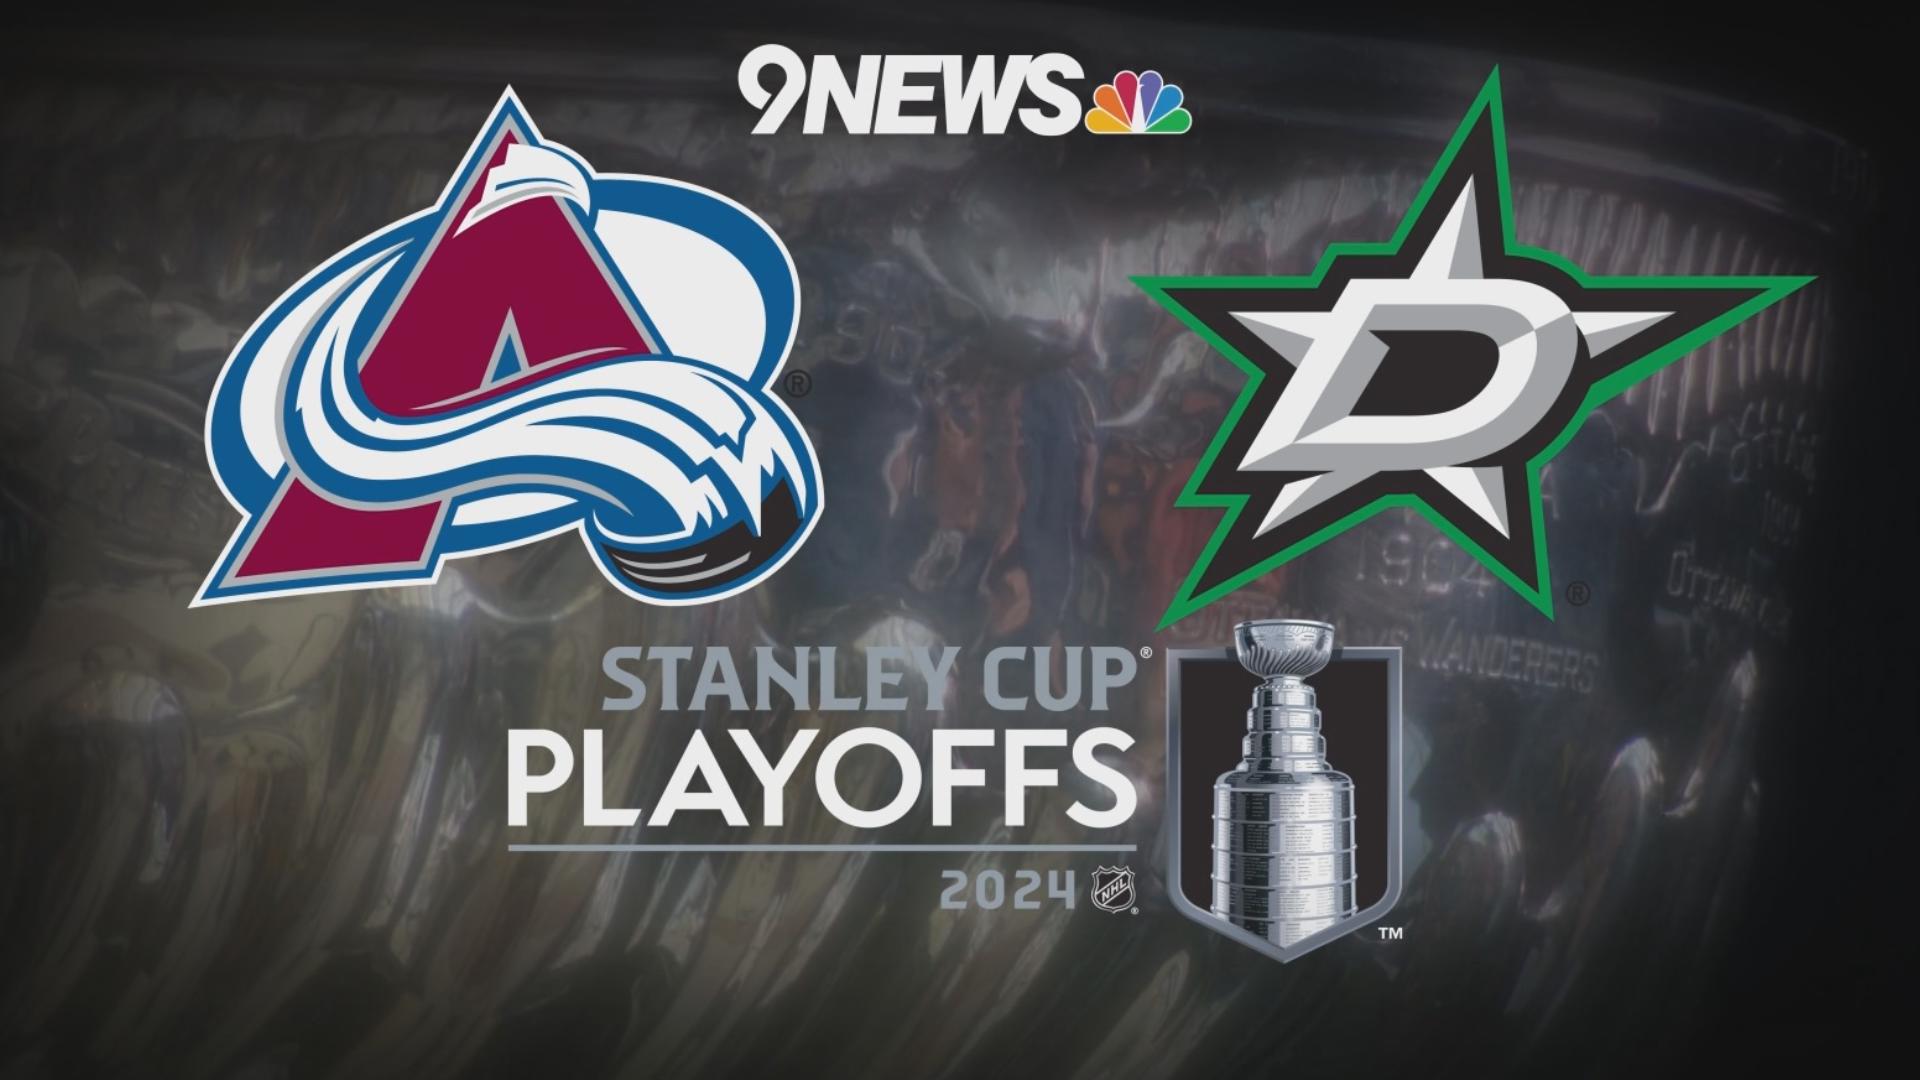 Colorado and Dallas kick off their series Tuesday night at the American Airlines Center.